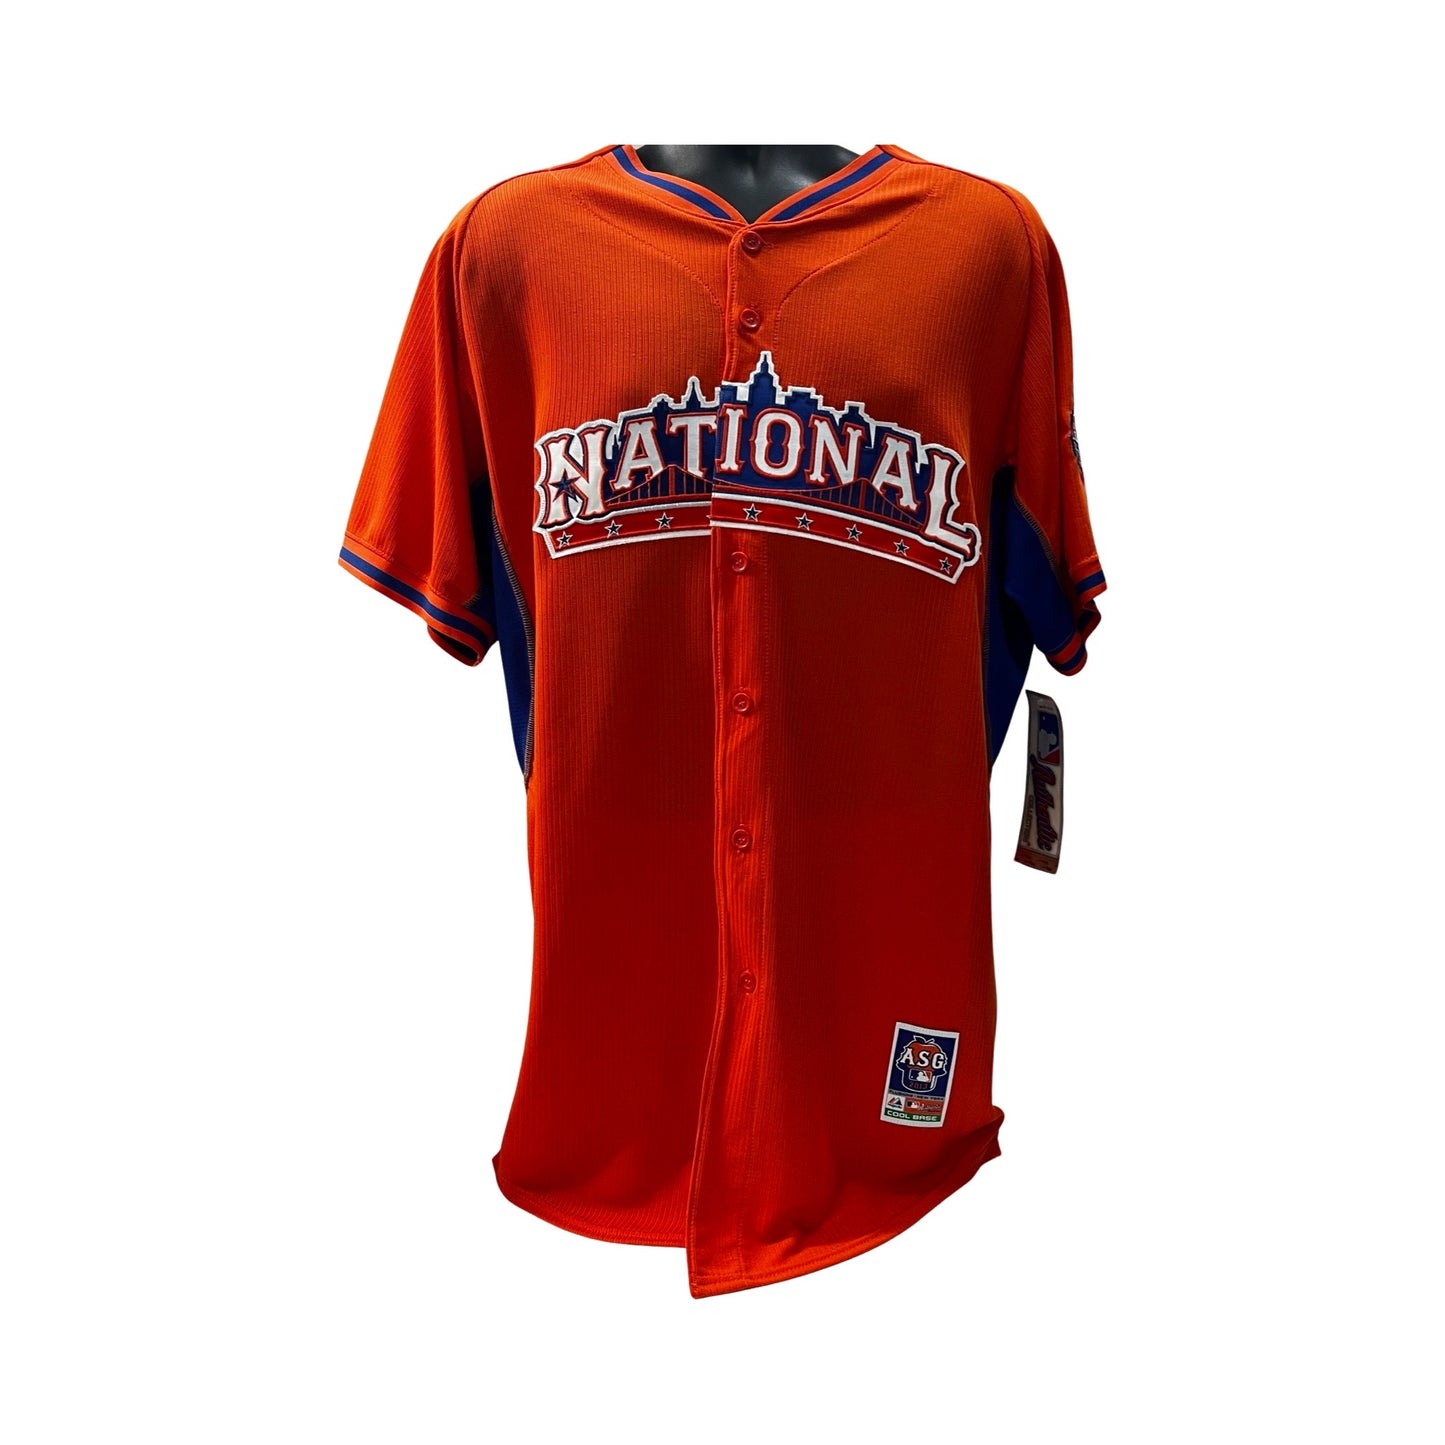 2013 MLB National League All Star Jersey Authentic Size 44